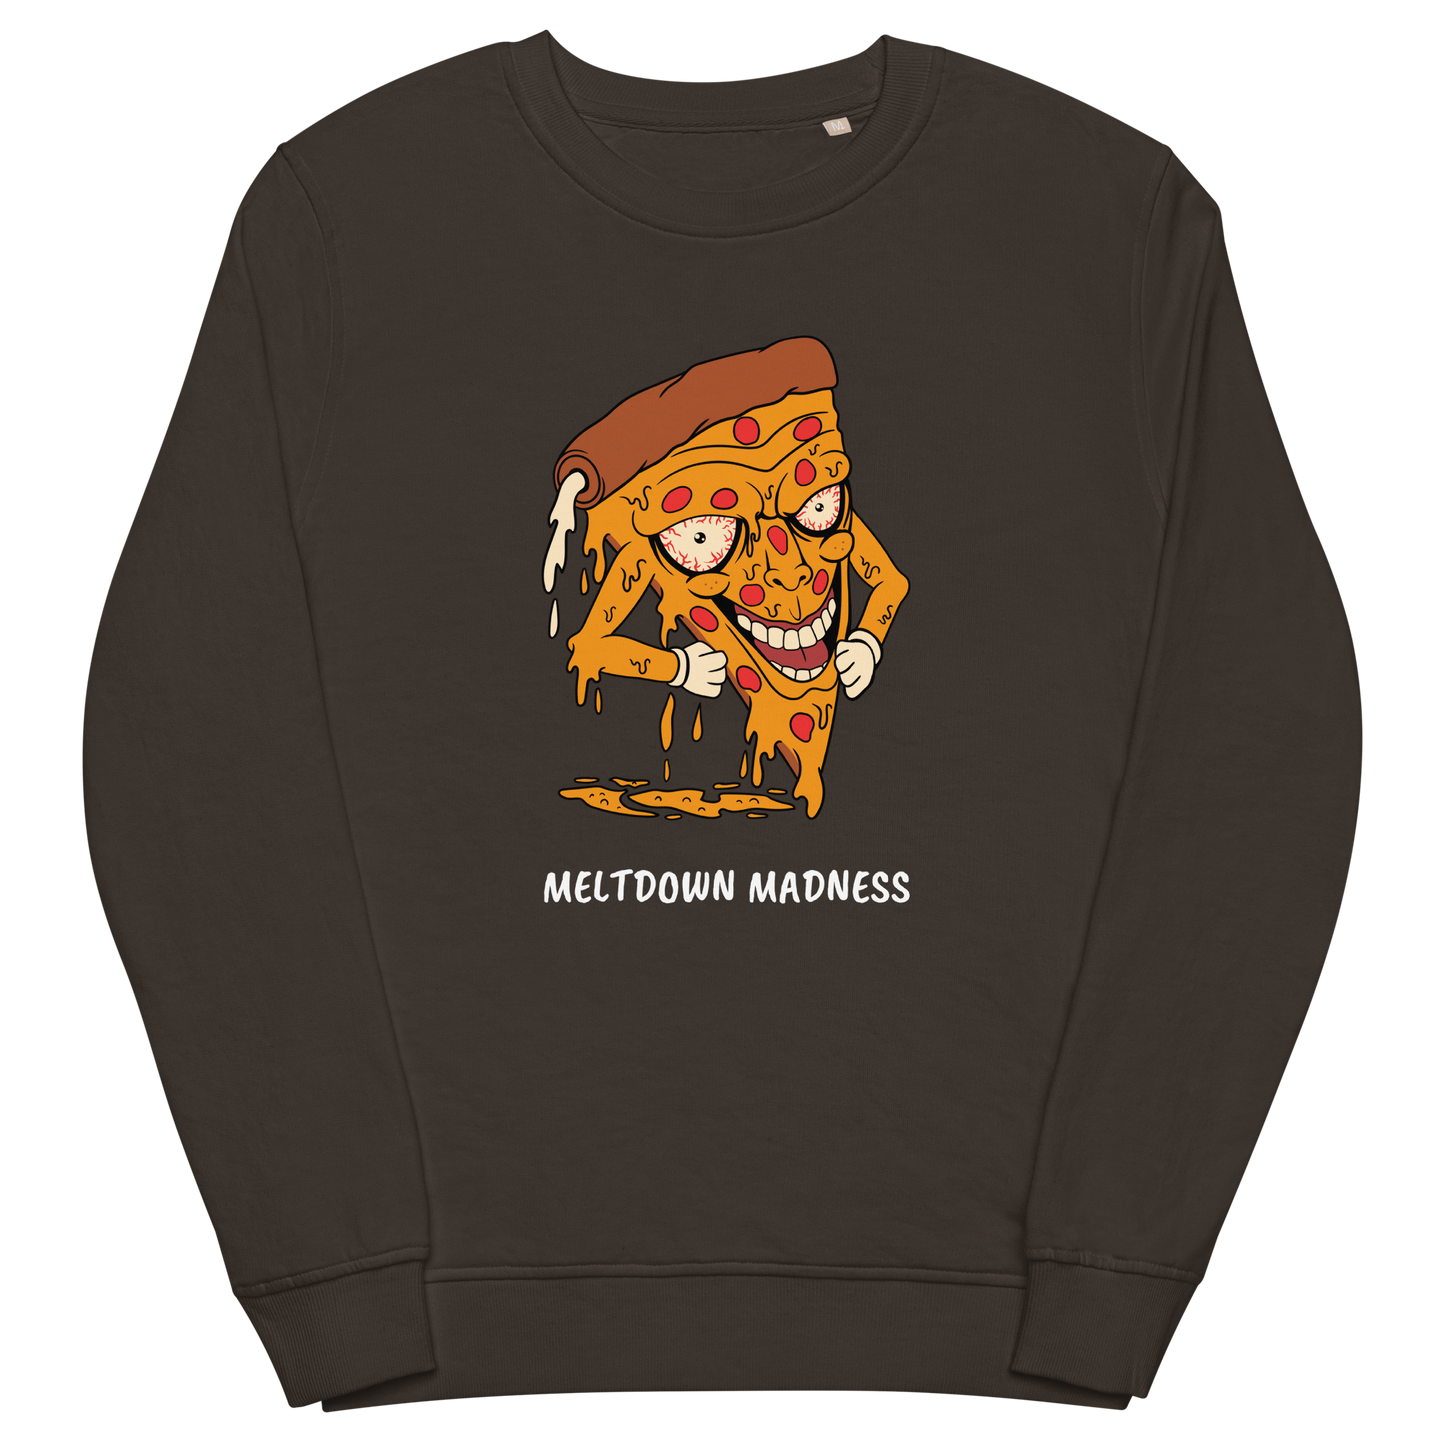 Deep Charcoal Grey Organic Cotton Melting Pizza Sweatshirt featuring a Meltdown Madness graphic on the chest - Funny Graphic Pizza Sweatshirts - Boozy Fox